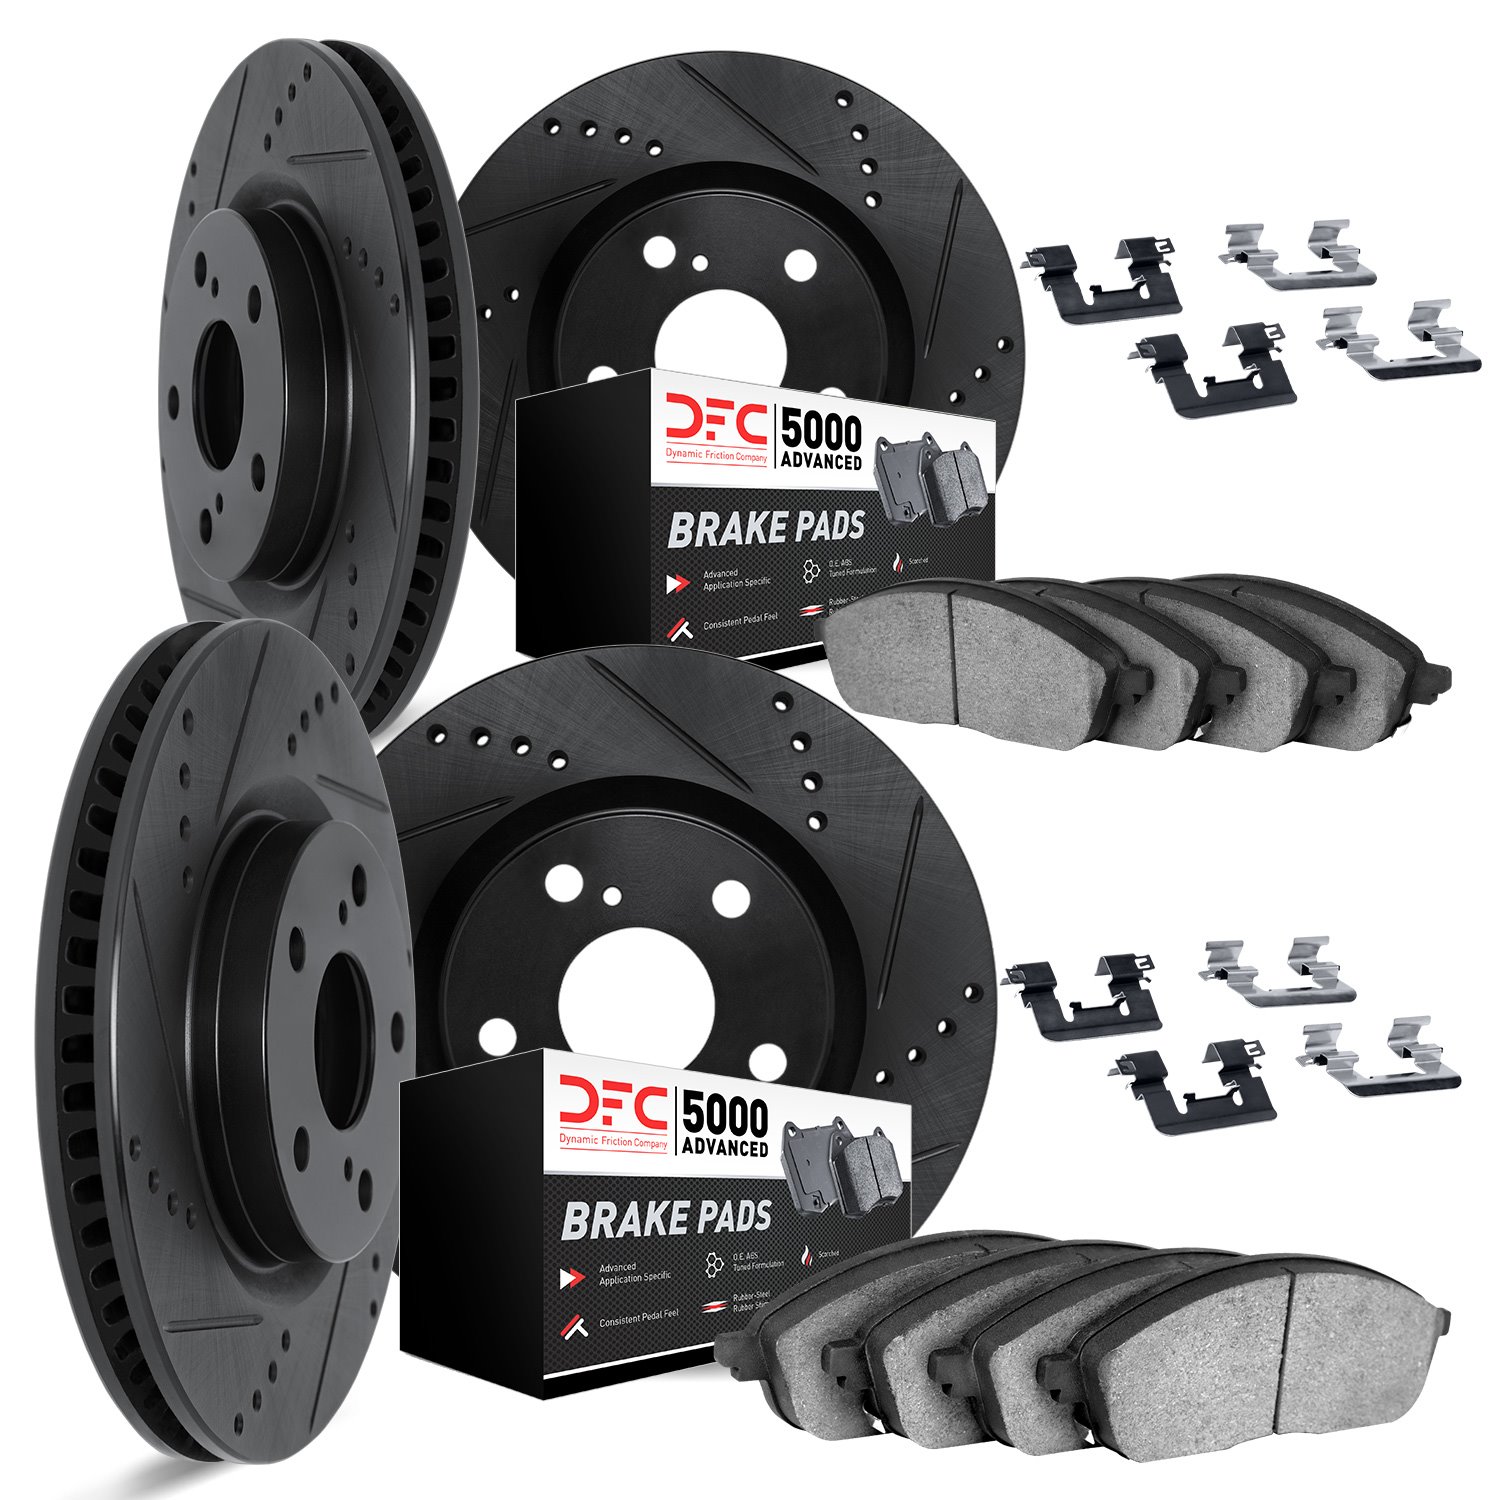 8514-31070 Drilled/Slotted Brake Rotors w/5000 Advanced Brake Pads Kit & Hardware [Black], 2014-2019 BMW, Position: Front and Re